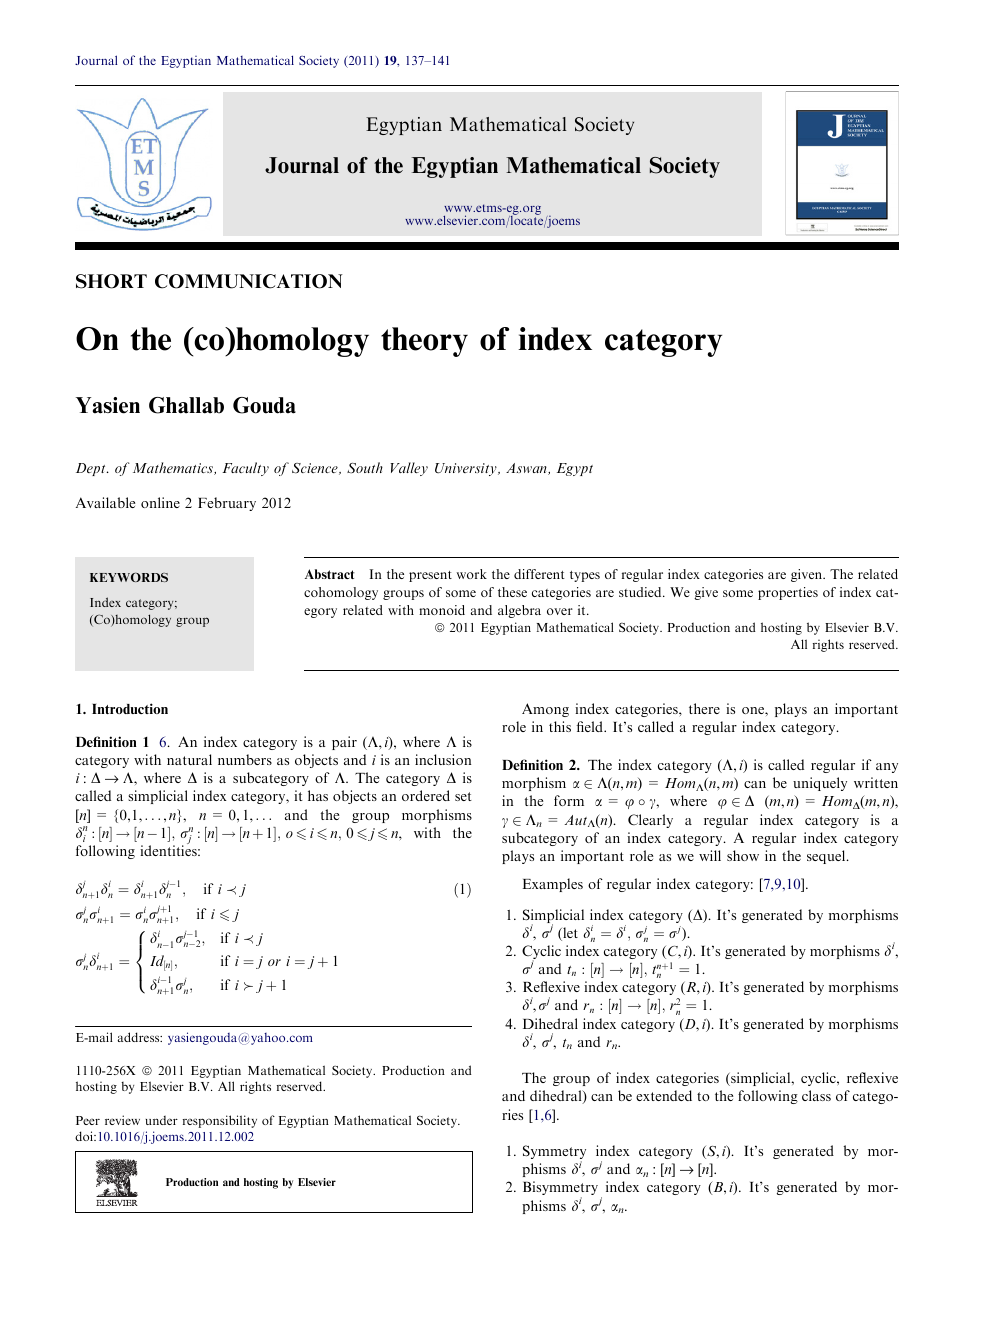 On The Co Homology Theory Of Index Category Topic Of Research Paper In Mathematics Download Scholarly Article Pdf And Read For Free On Cyberleninka Open Science Hub